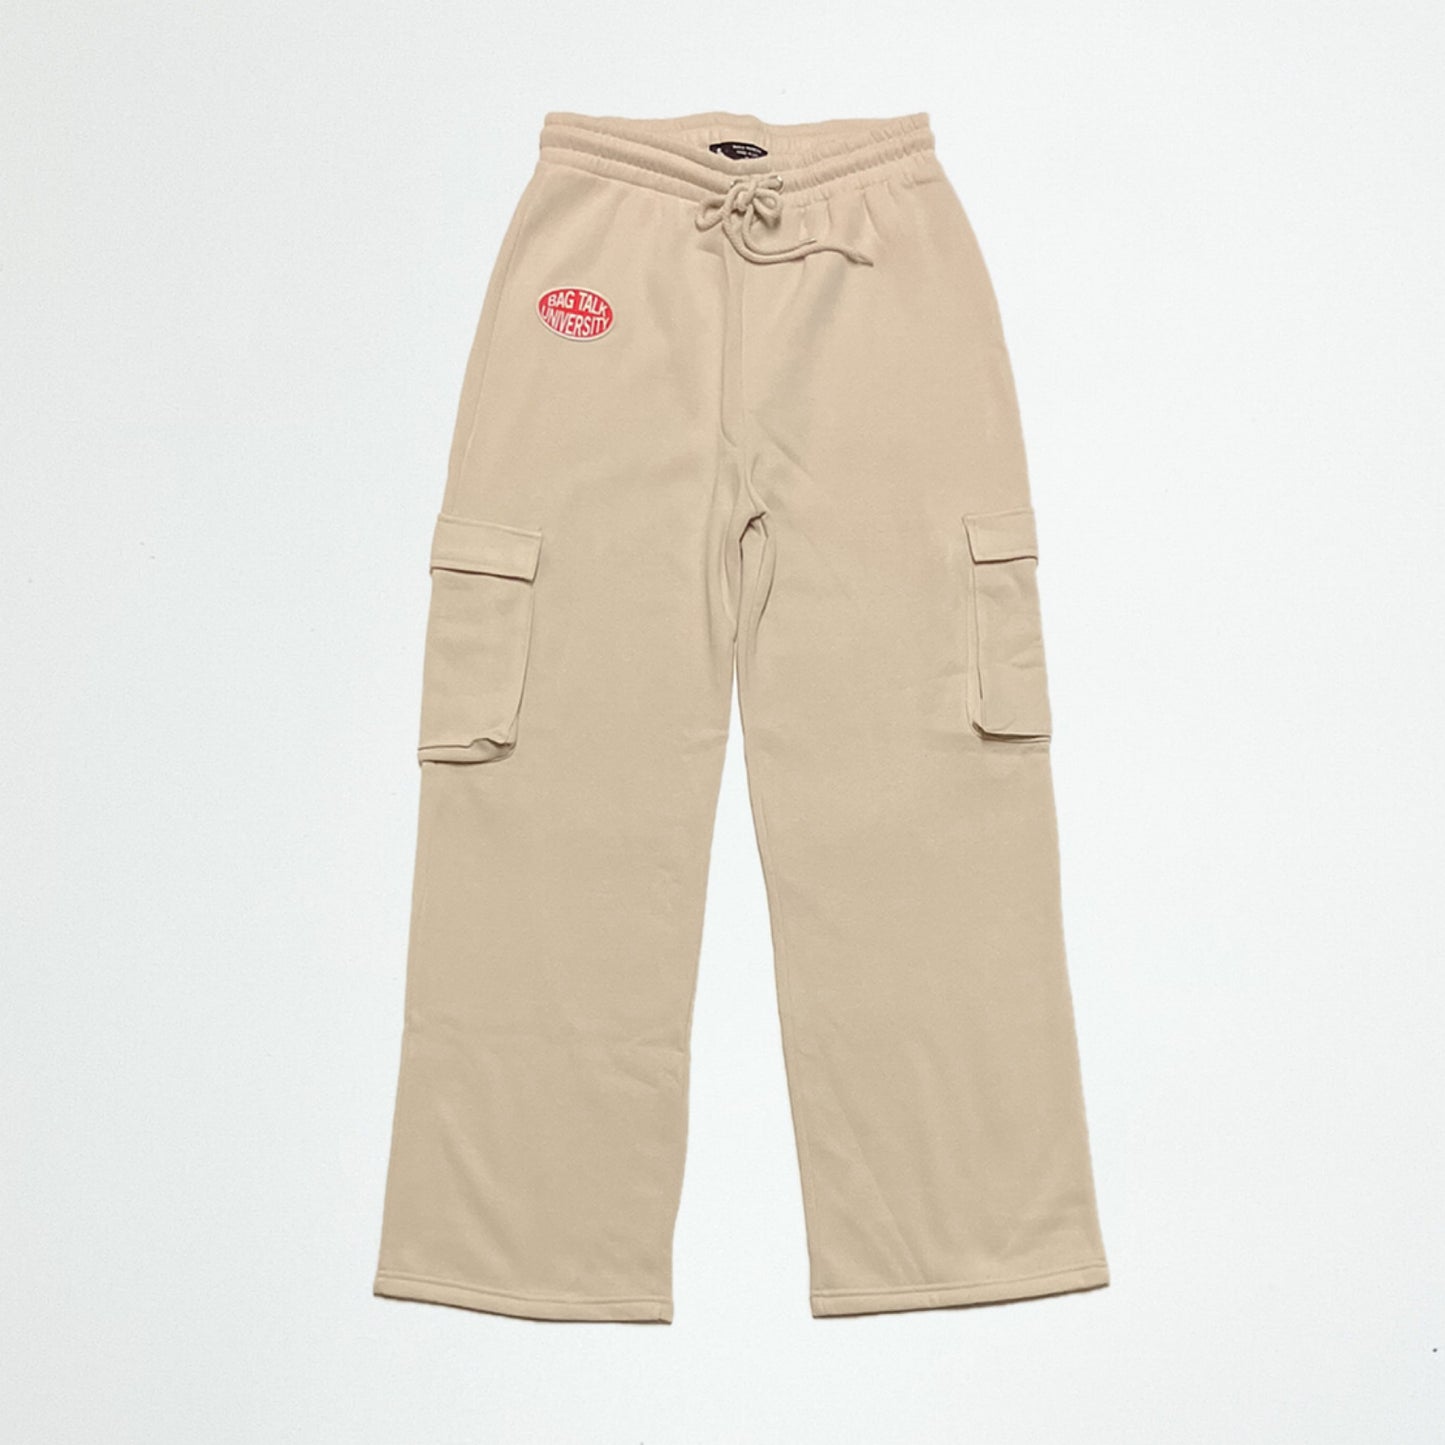 Patched Straight Leg Cargo Pants (Cream)